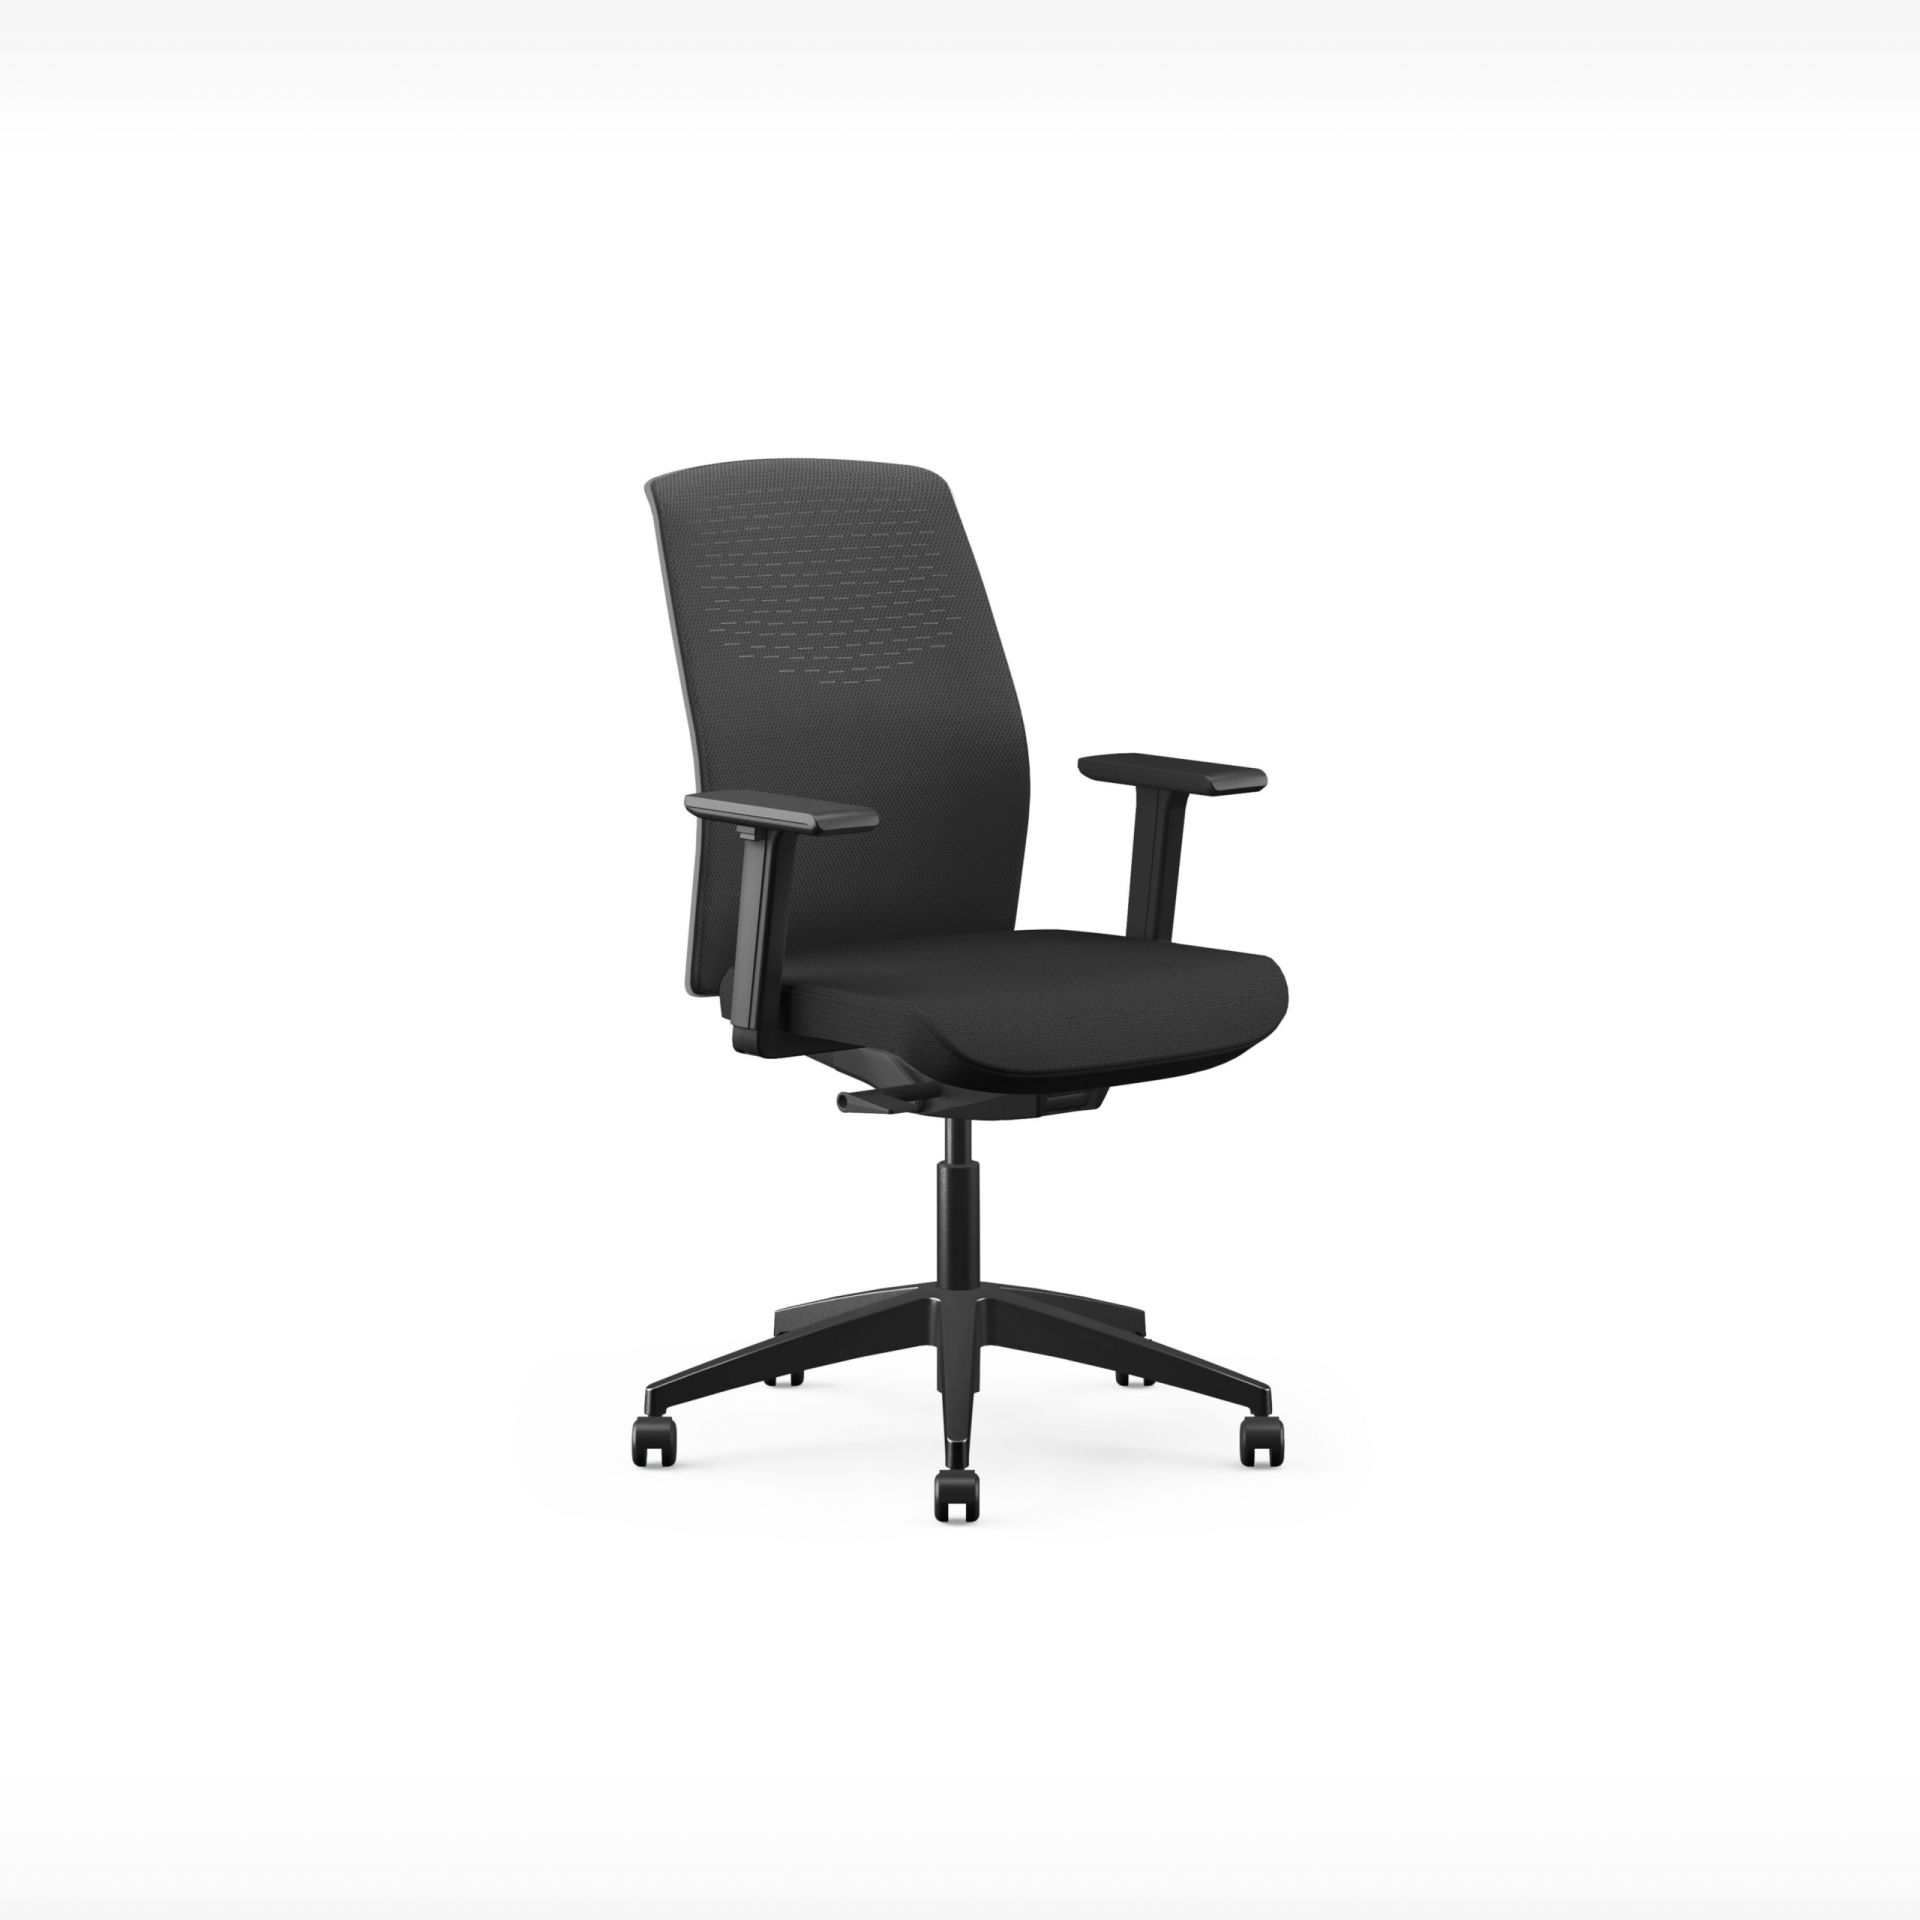 Yoyo Office chair with mesh back product image 4